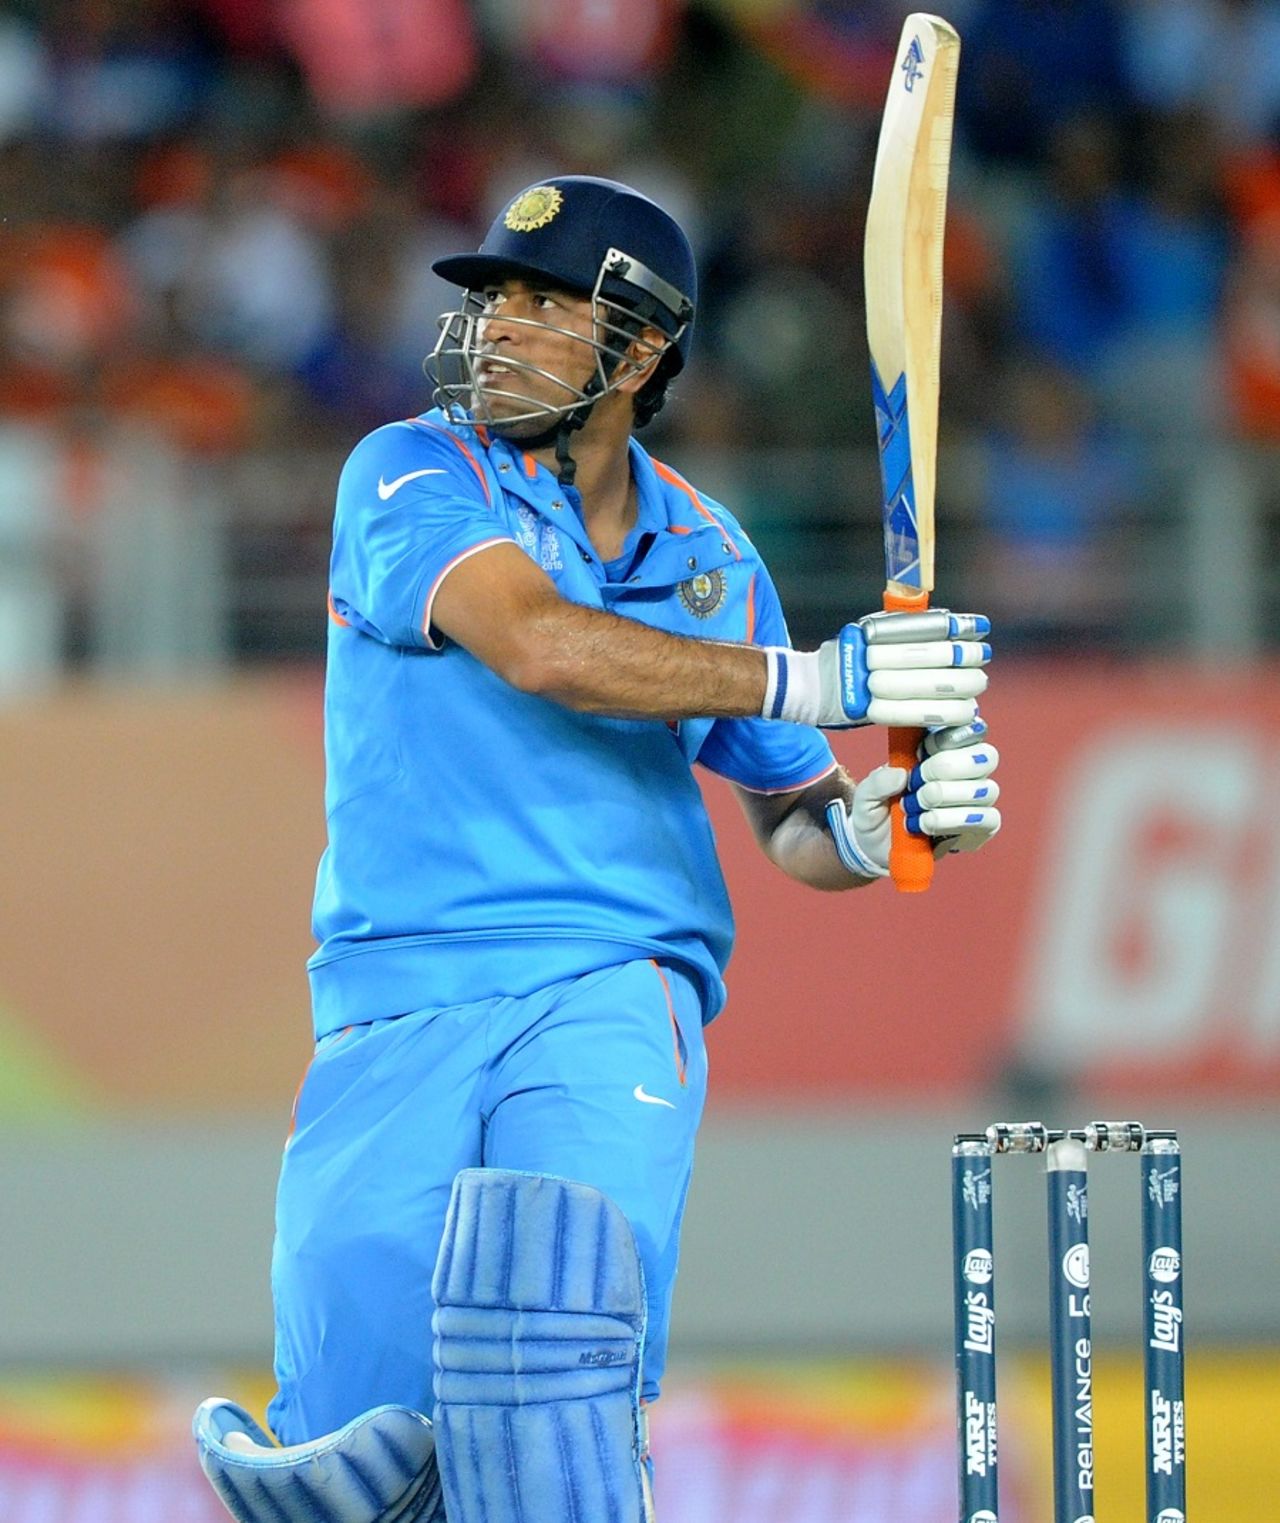 Dhoni finished the chase with a pulled six, India v Zimbabwe, World Cup 2015, Group B, Auckland, March 14, 2015